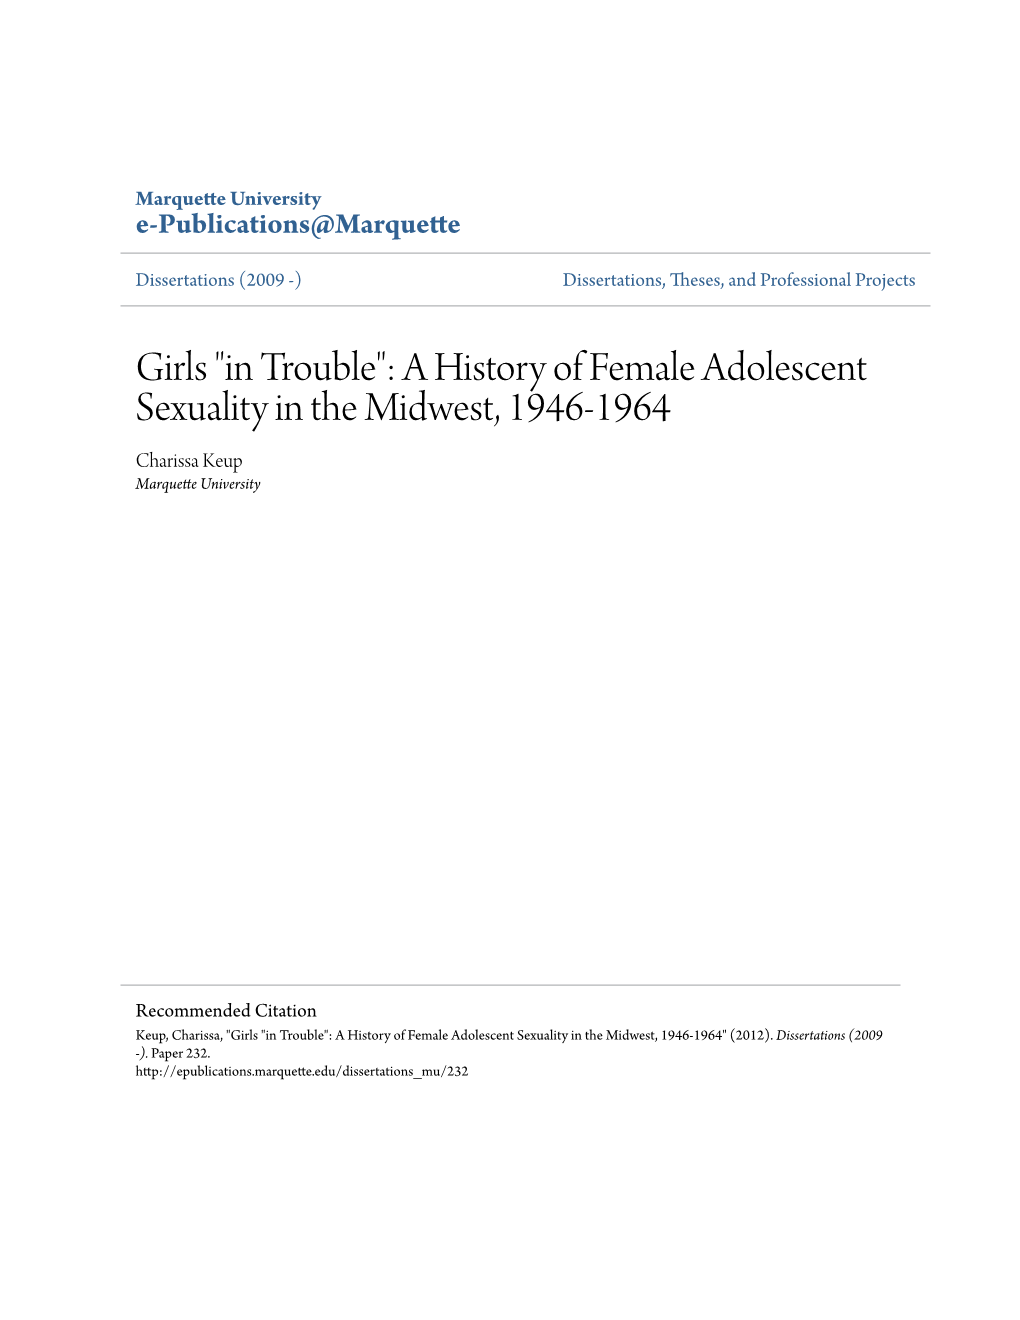 Girls "In Trouble": a History of Female Adolescent Sexuality in the Midwest, 1946-1964 Charissa Keup Marquette University